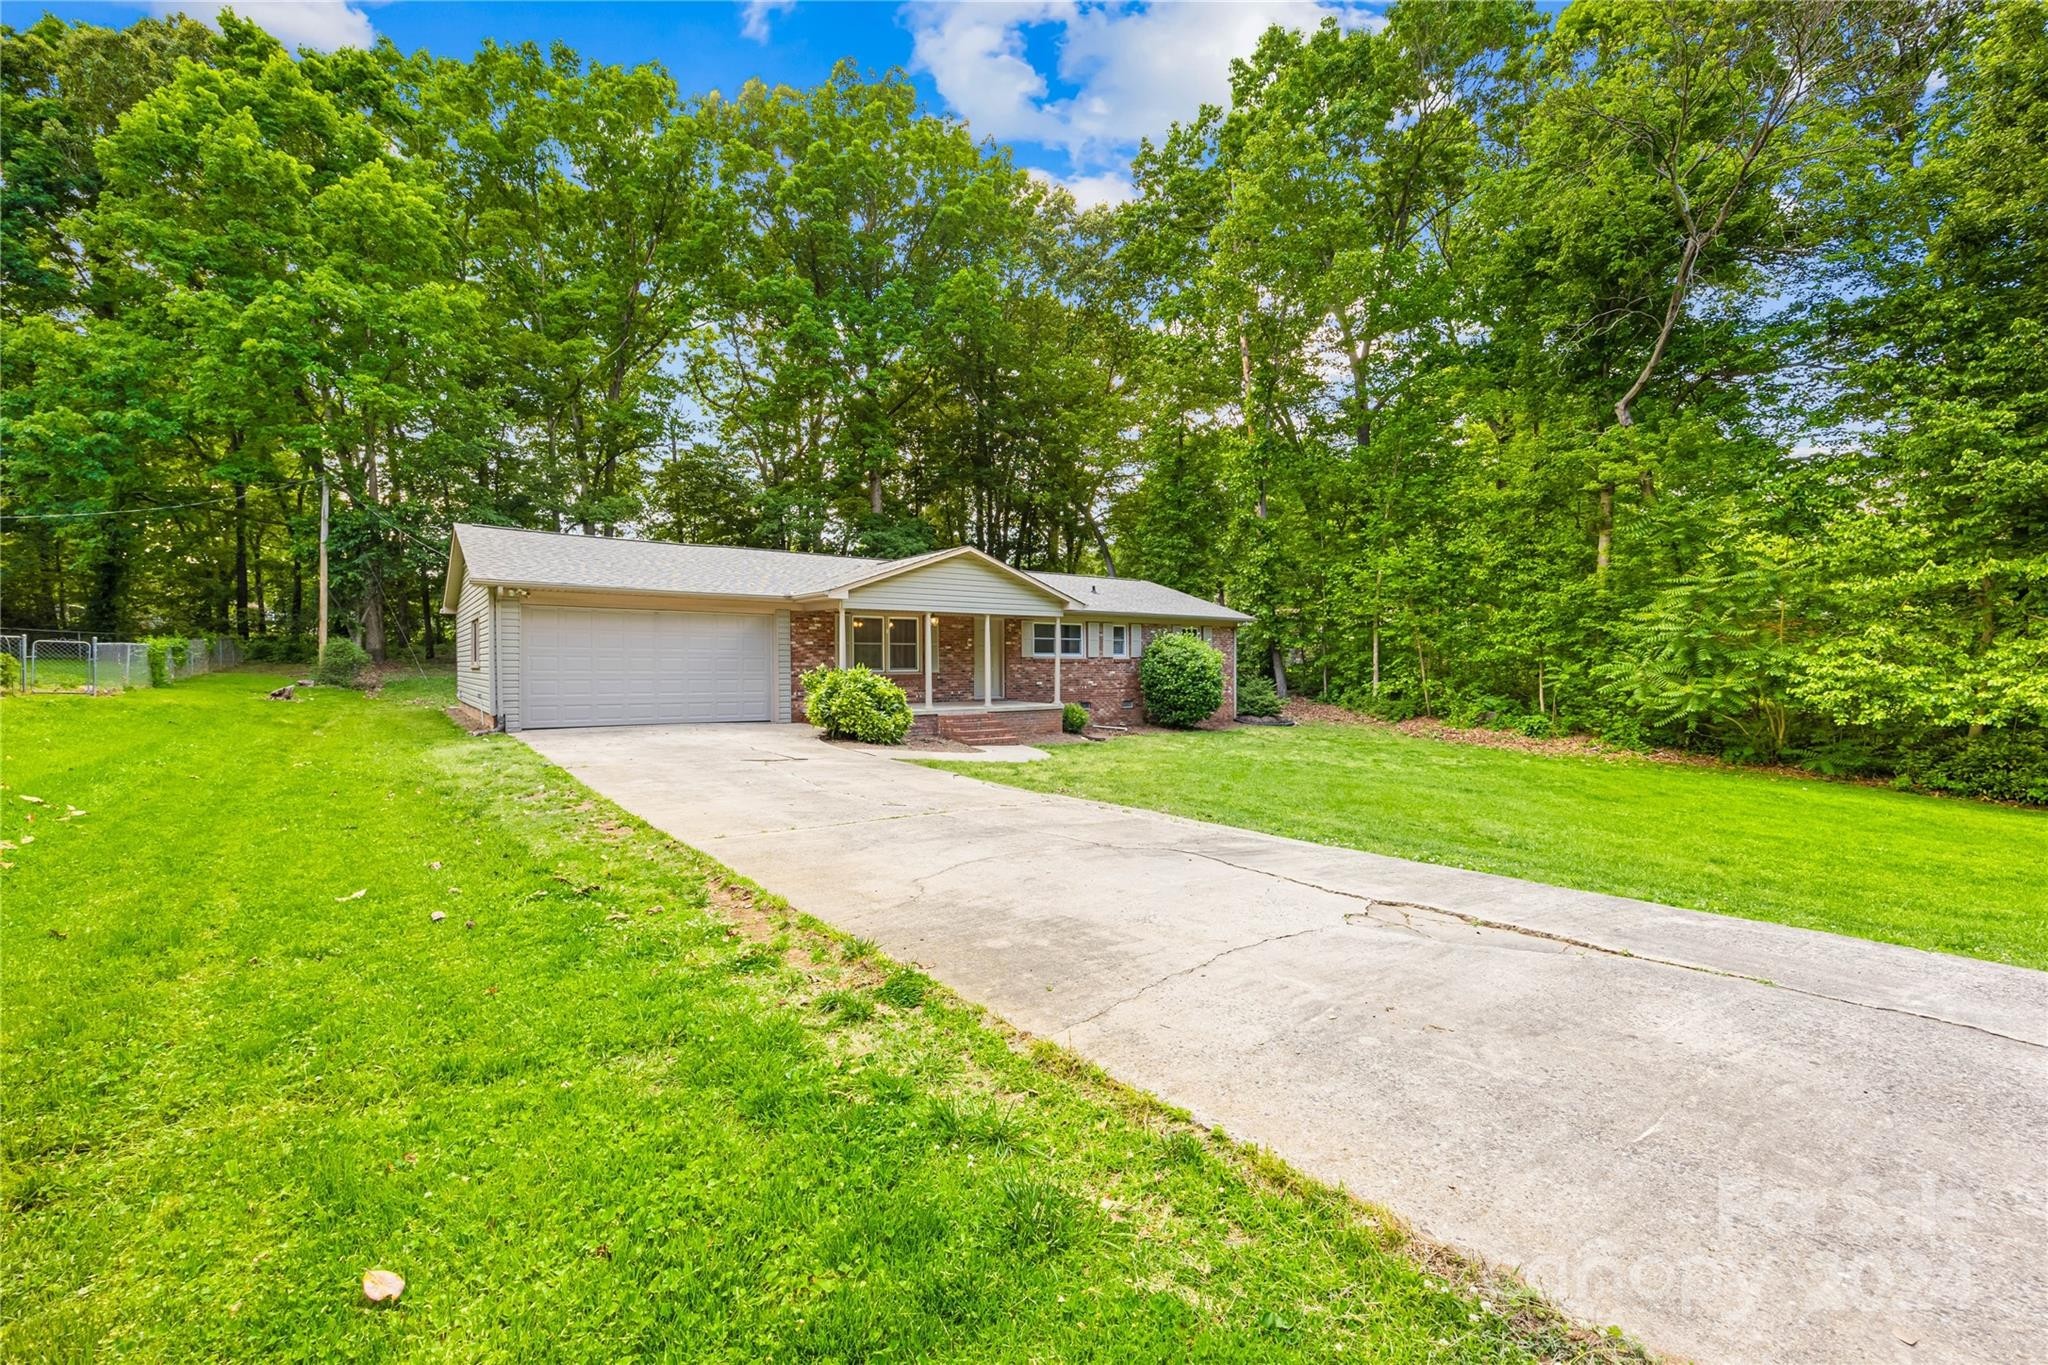 31. 1826 Whispering Pines Road